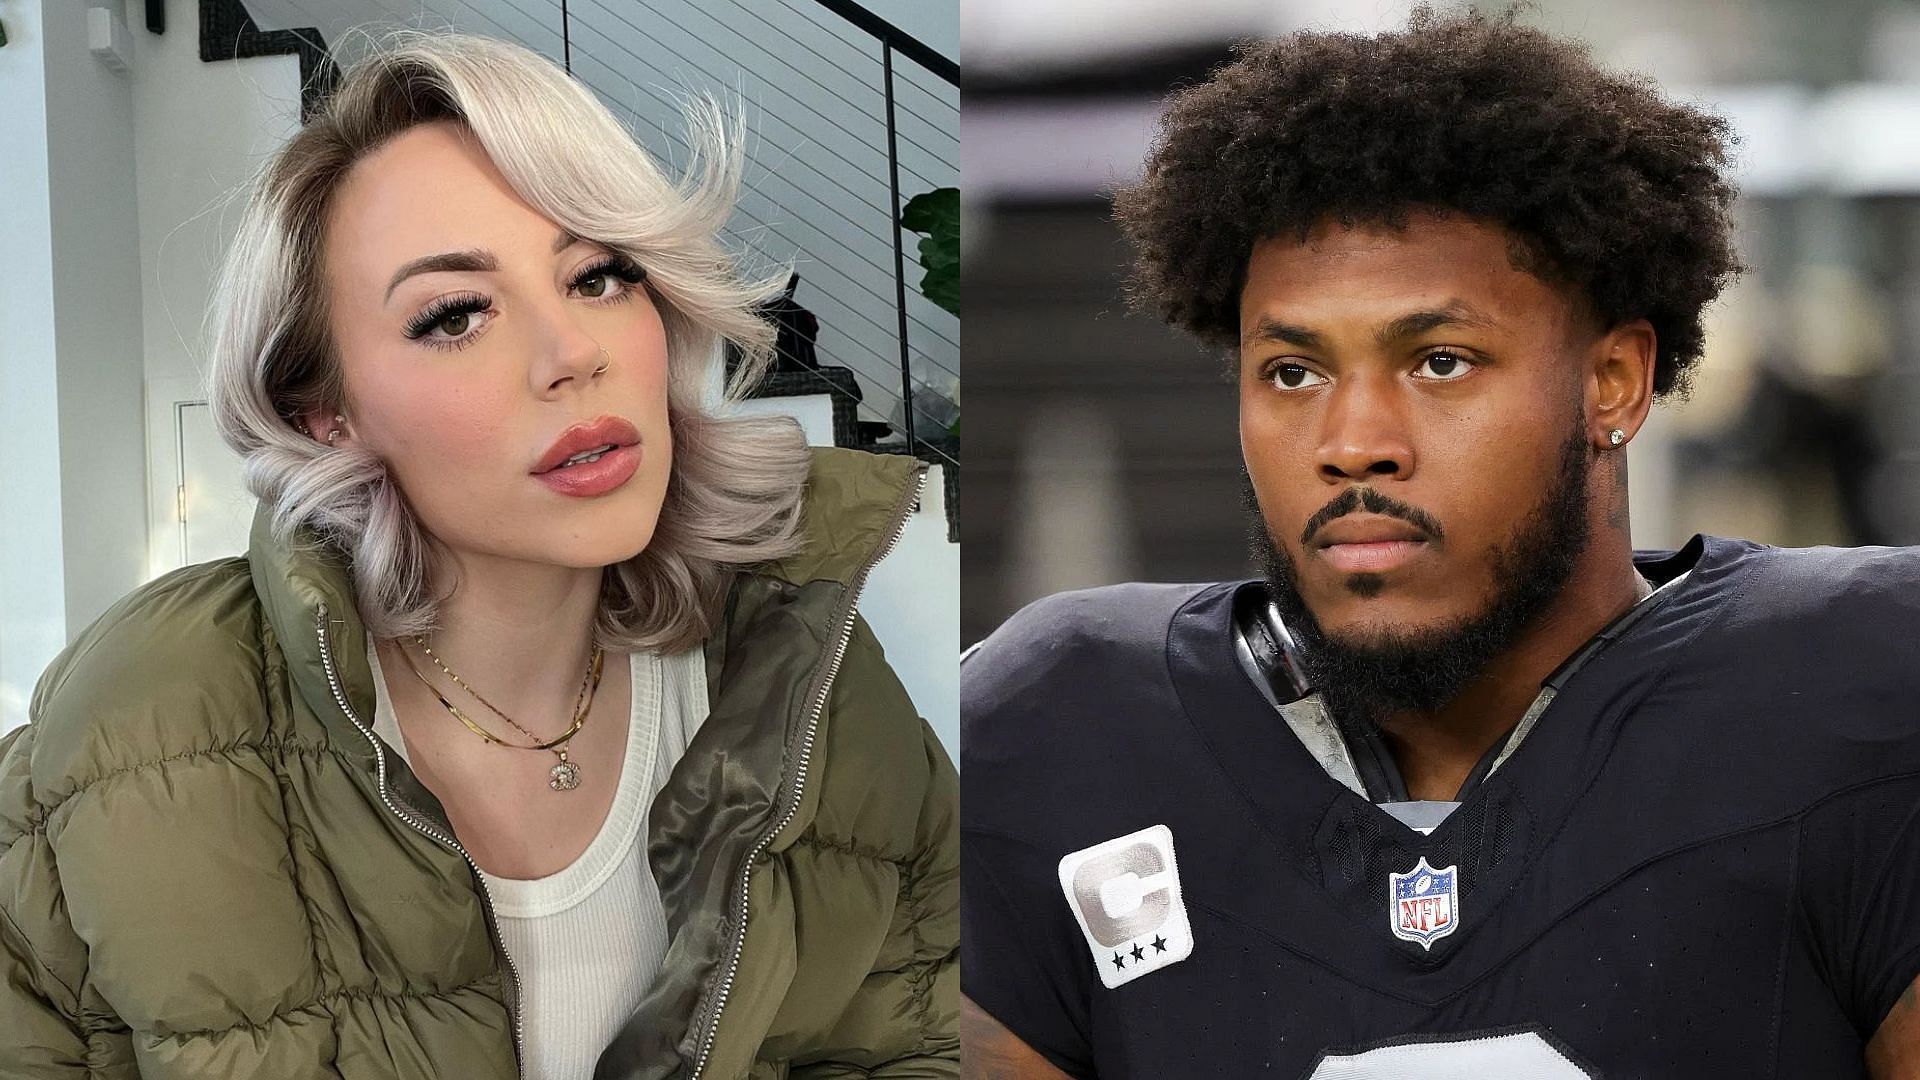 Online personality Woah Kenzy revealed how Josh Jacobs allegedly cheated on her. (Image credit: Woah Kenzy on Instagram)